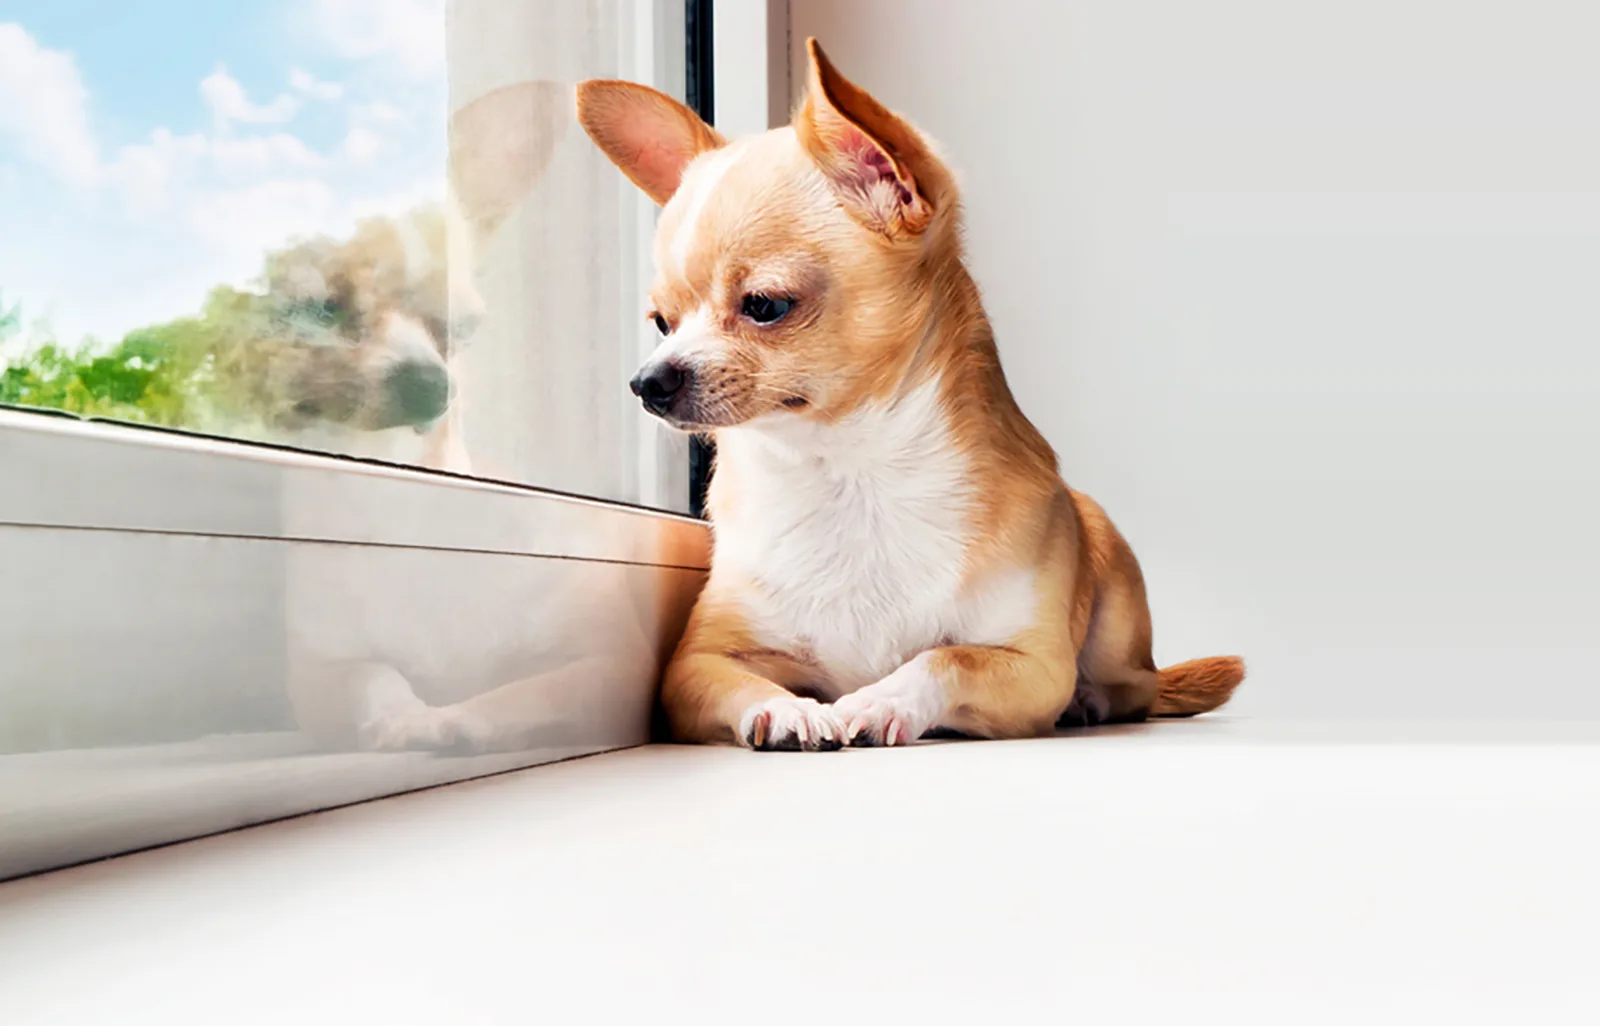 chihuahua looking out the window and sitting alone